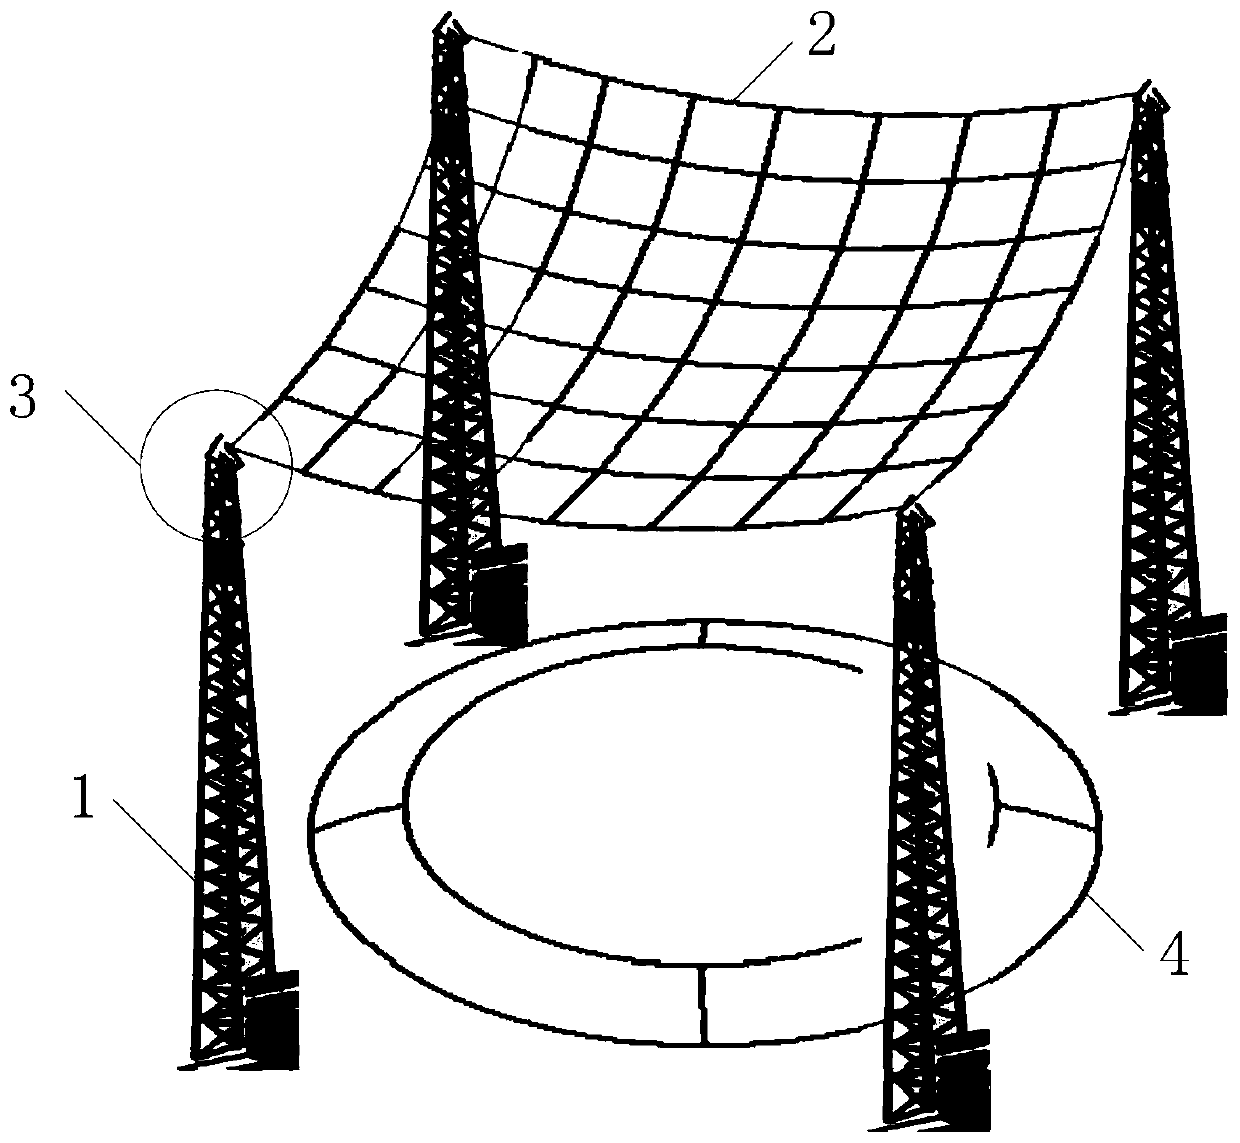 Electromagnetic damping device for spacecraft recovery